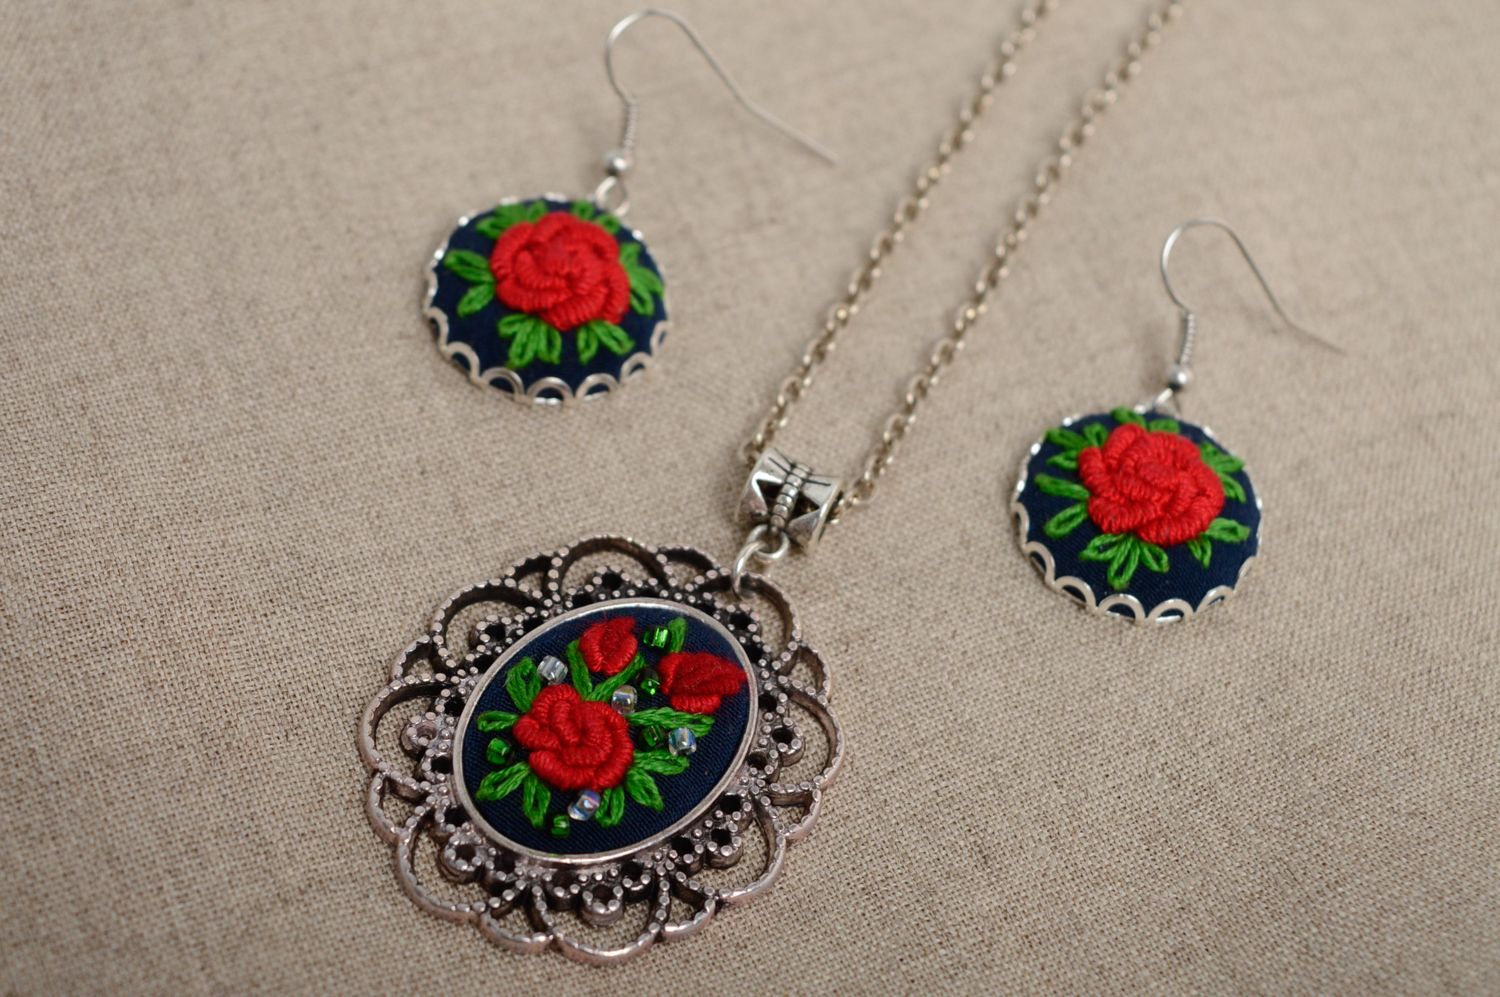 Rococo embroidered earrings and pendant photo 1